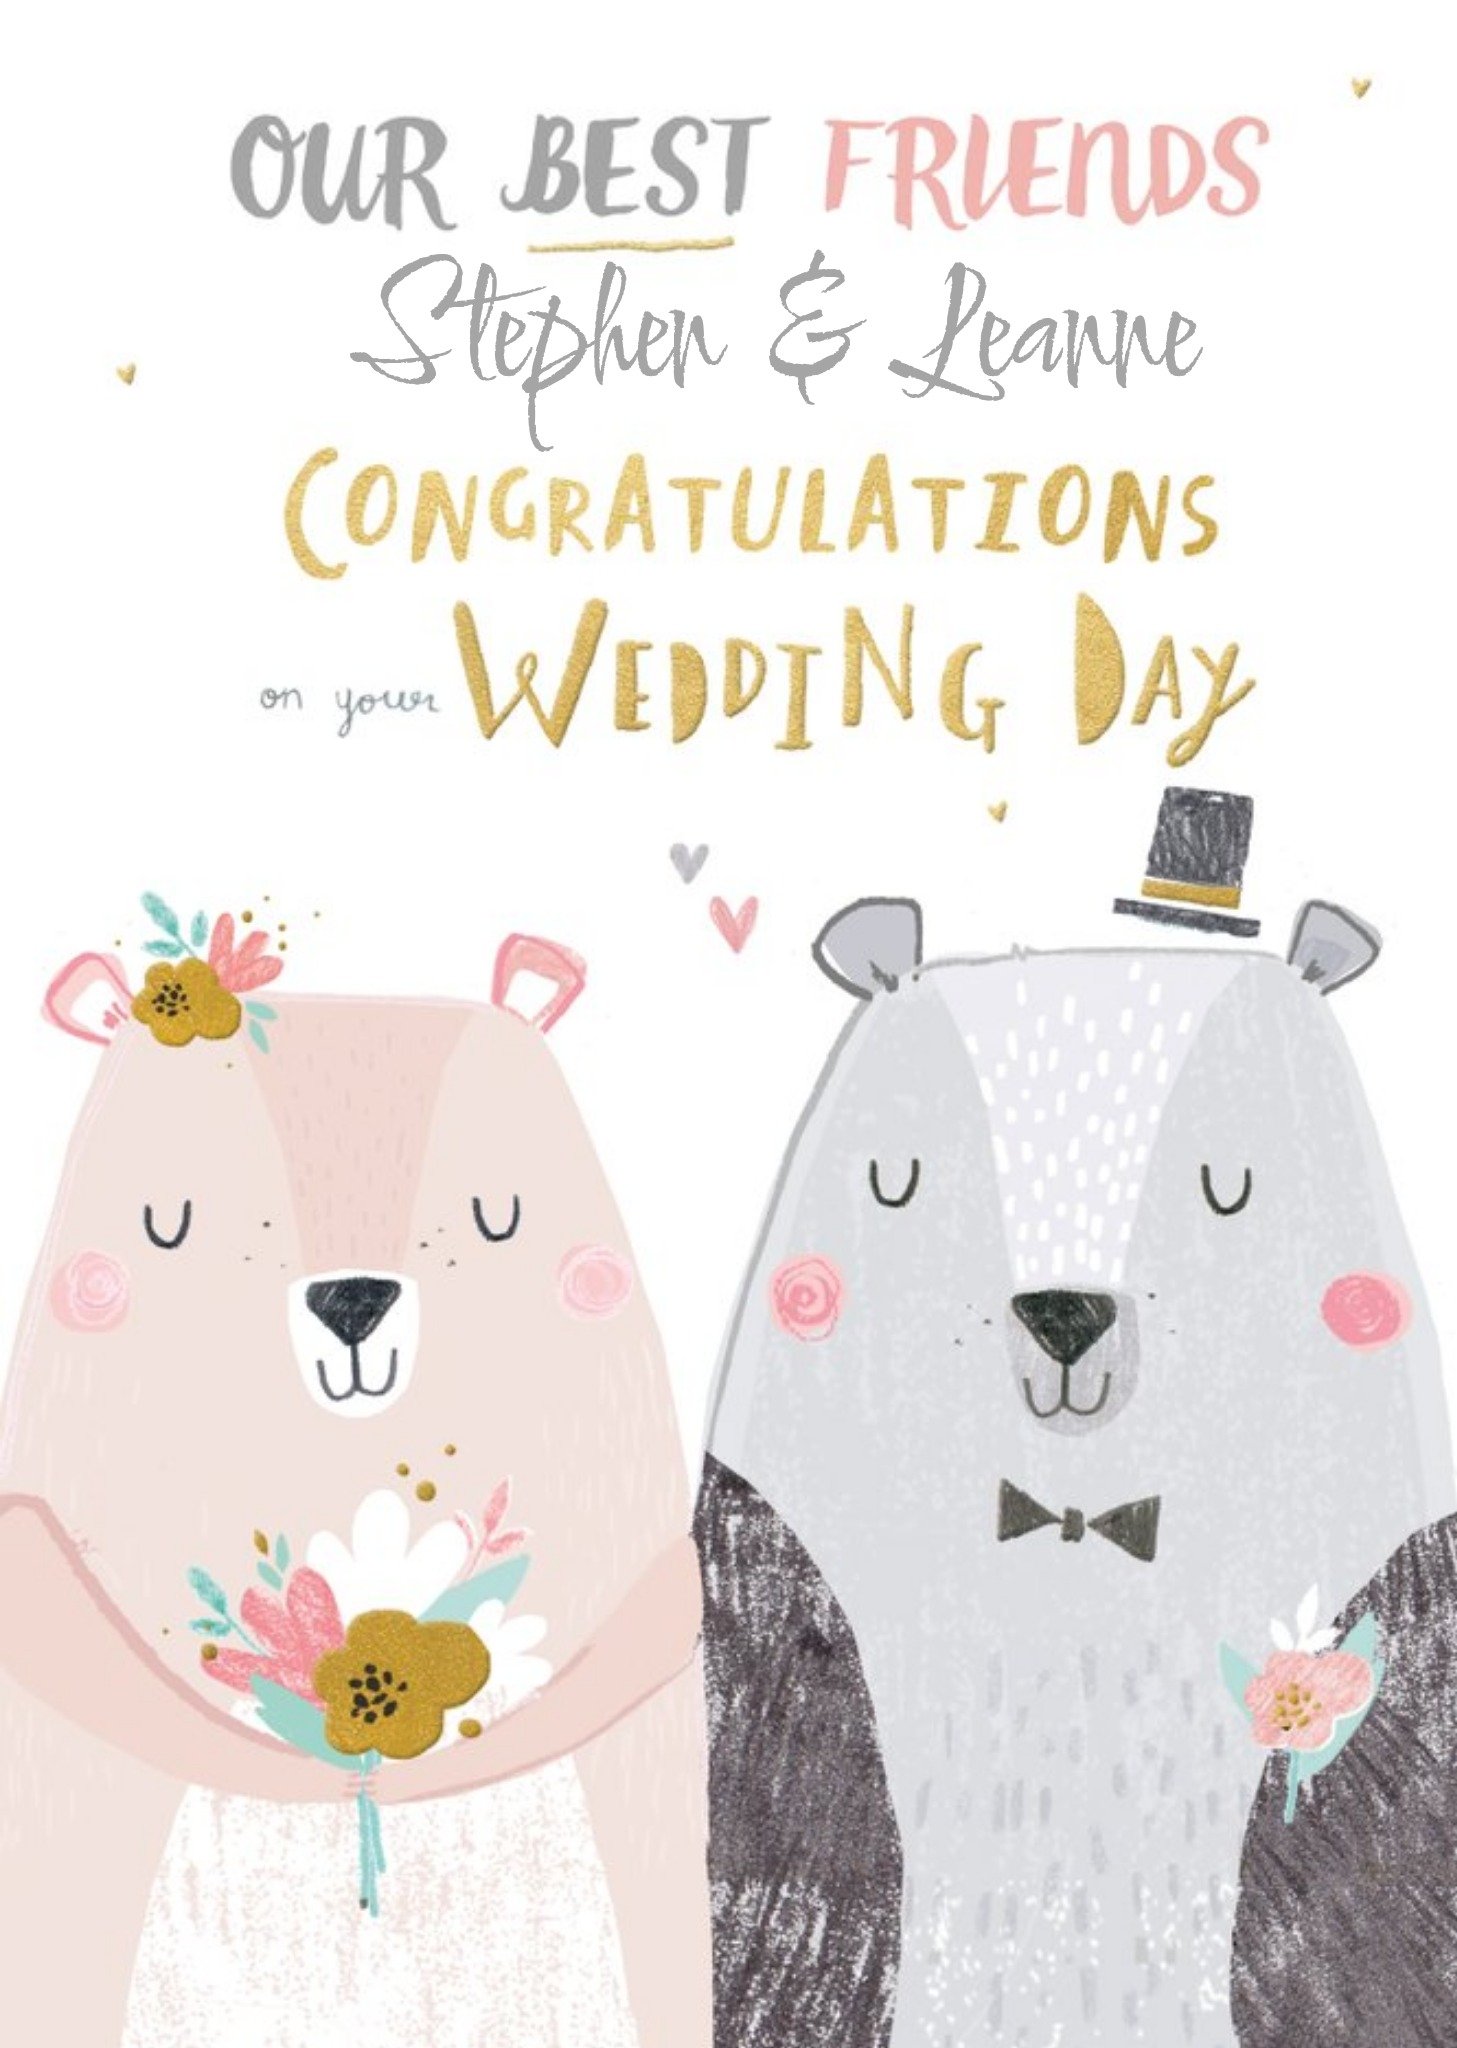 Moonpig Hotchpotch Our Best Friends Illustrated Bears Customisable Wedding Day Card, Large